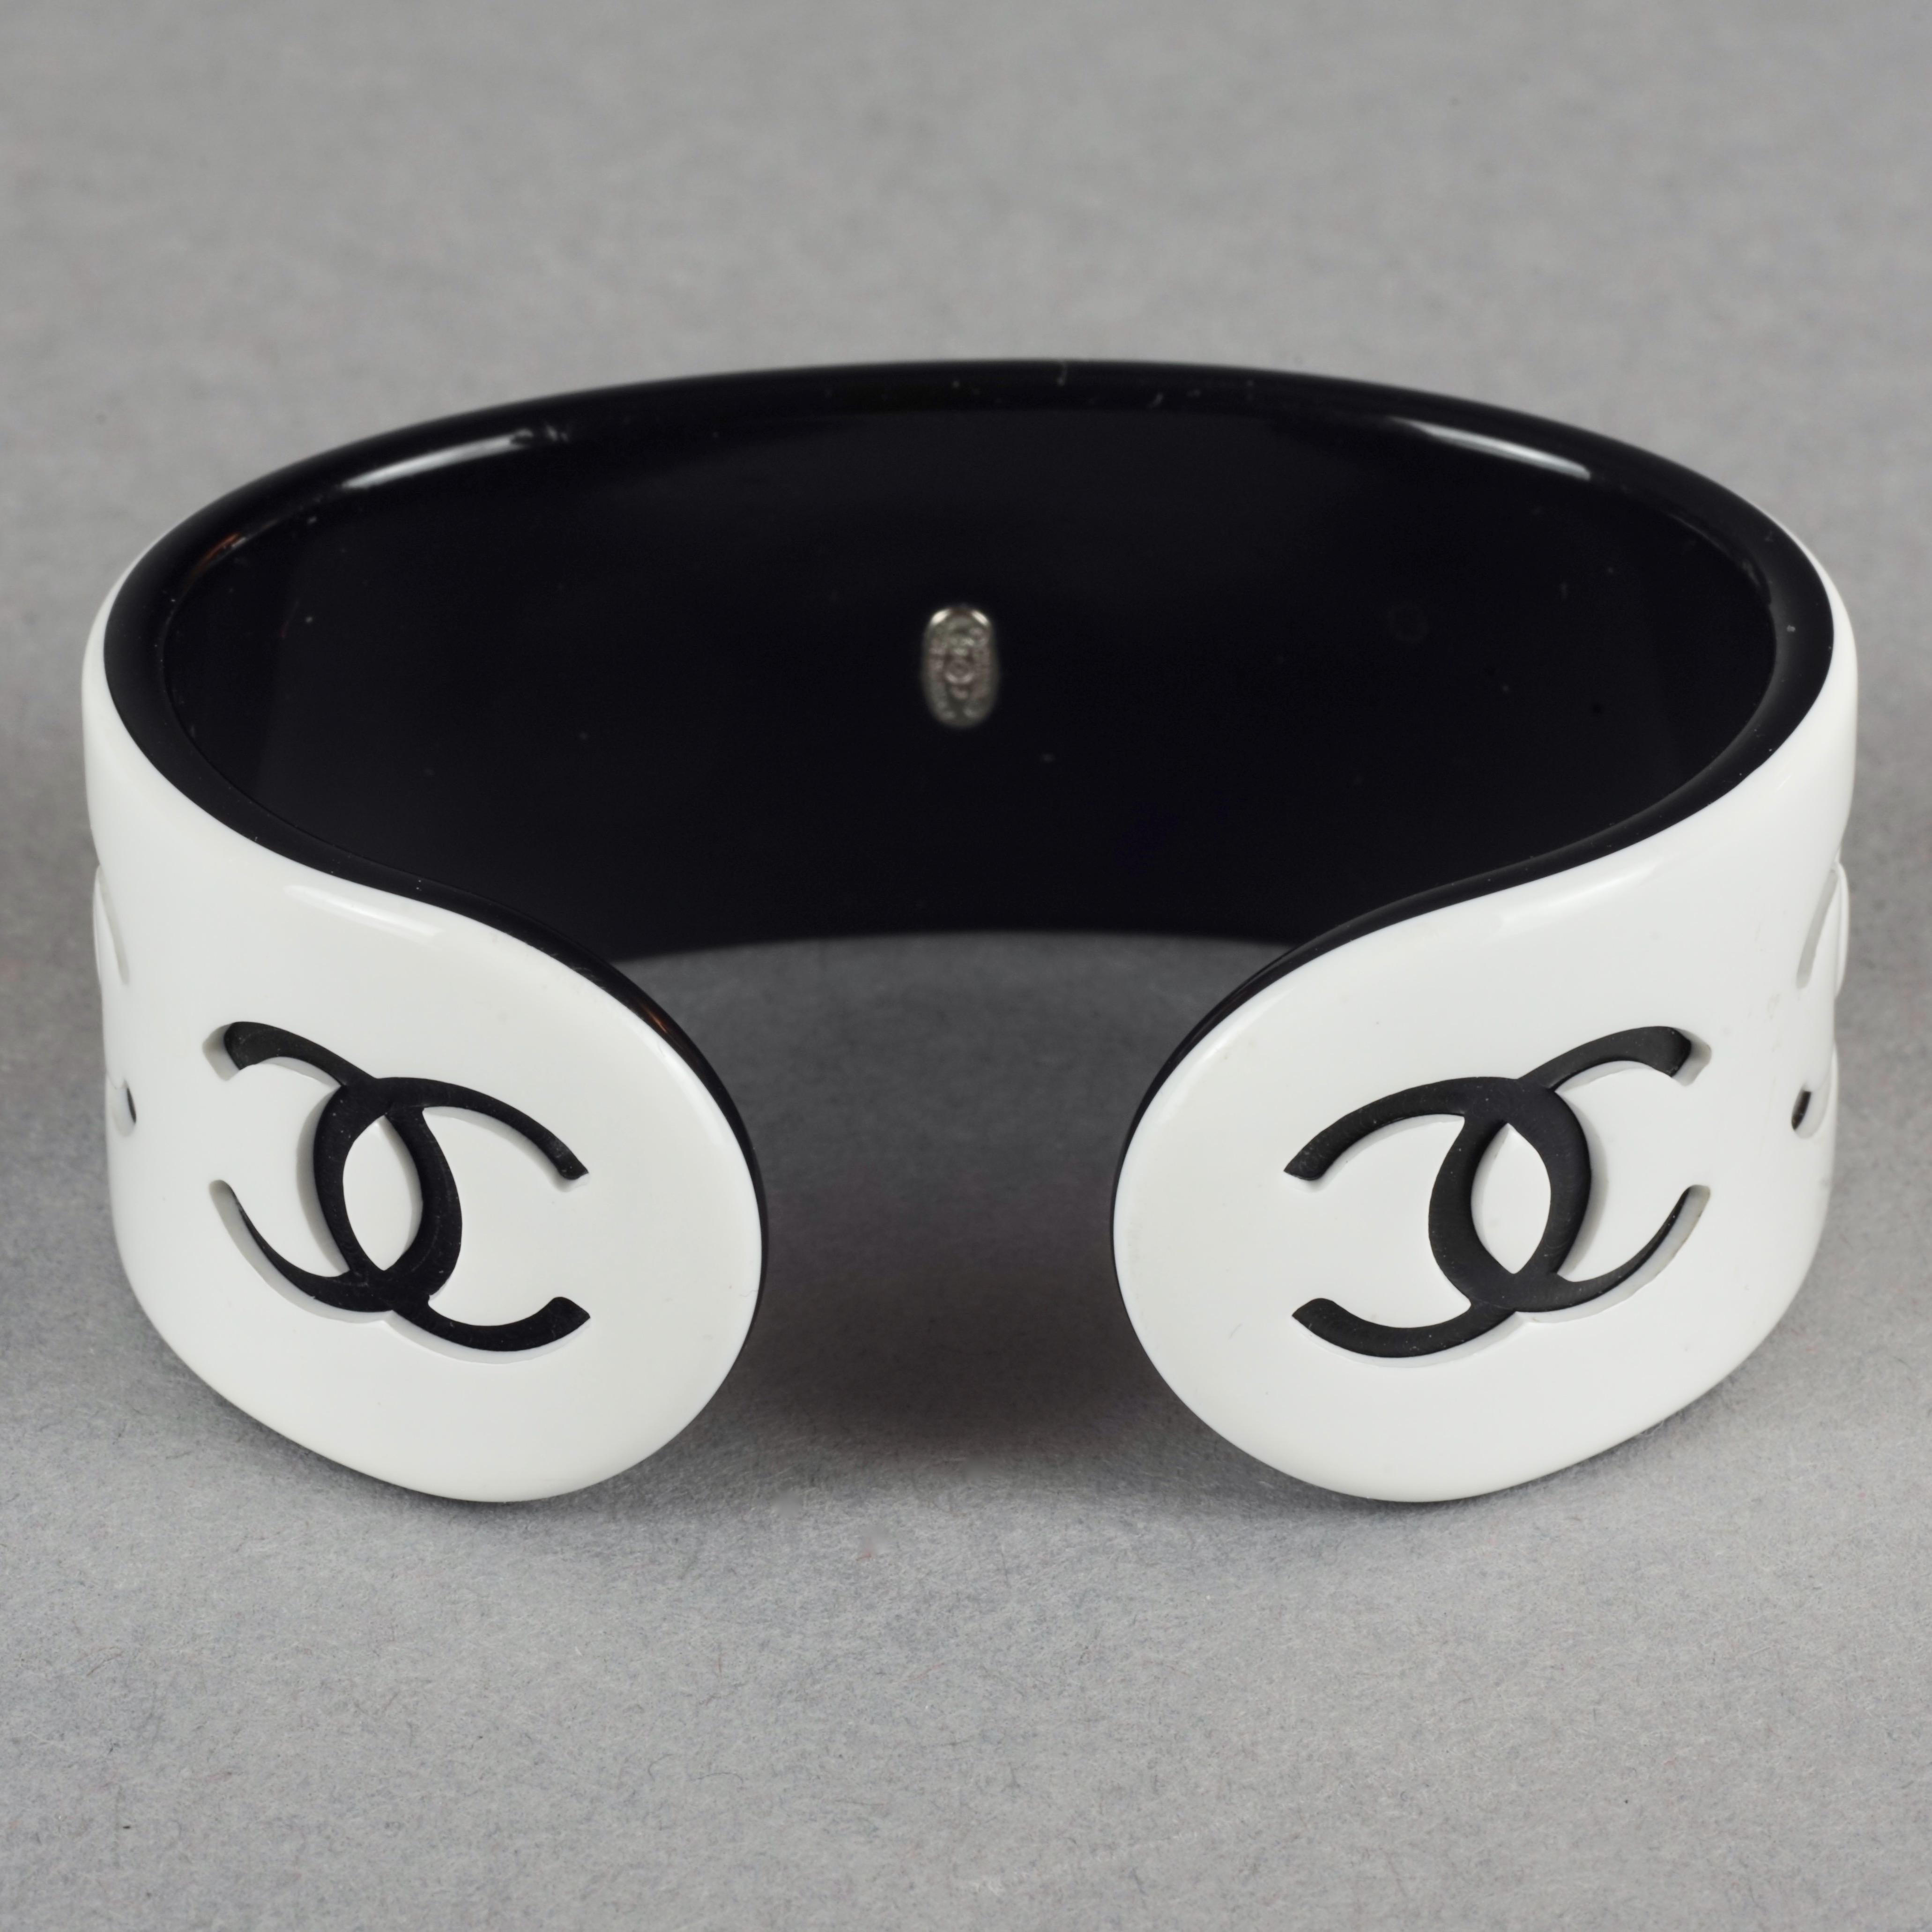 Vintage 2002 CHANEL White and Black CC Logo Perspex Cuff Bracelet In Excellent Condition For Sale In Kingersheim, Alsace